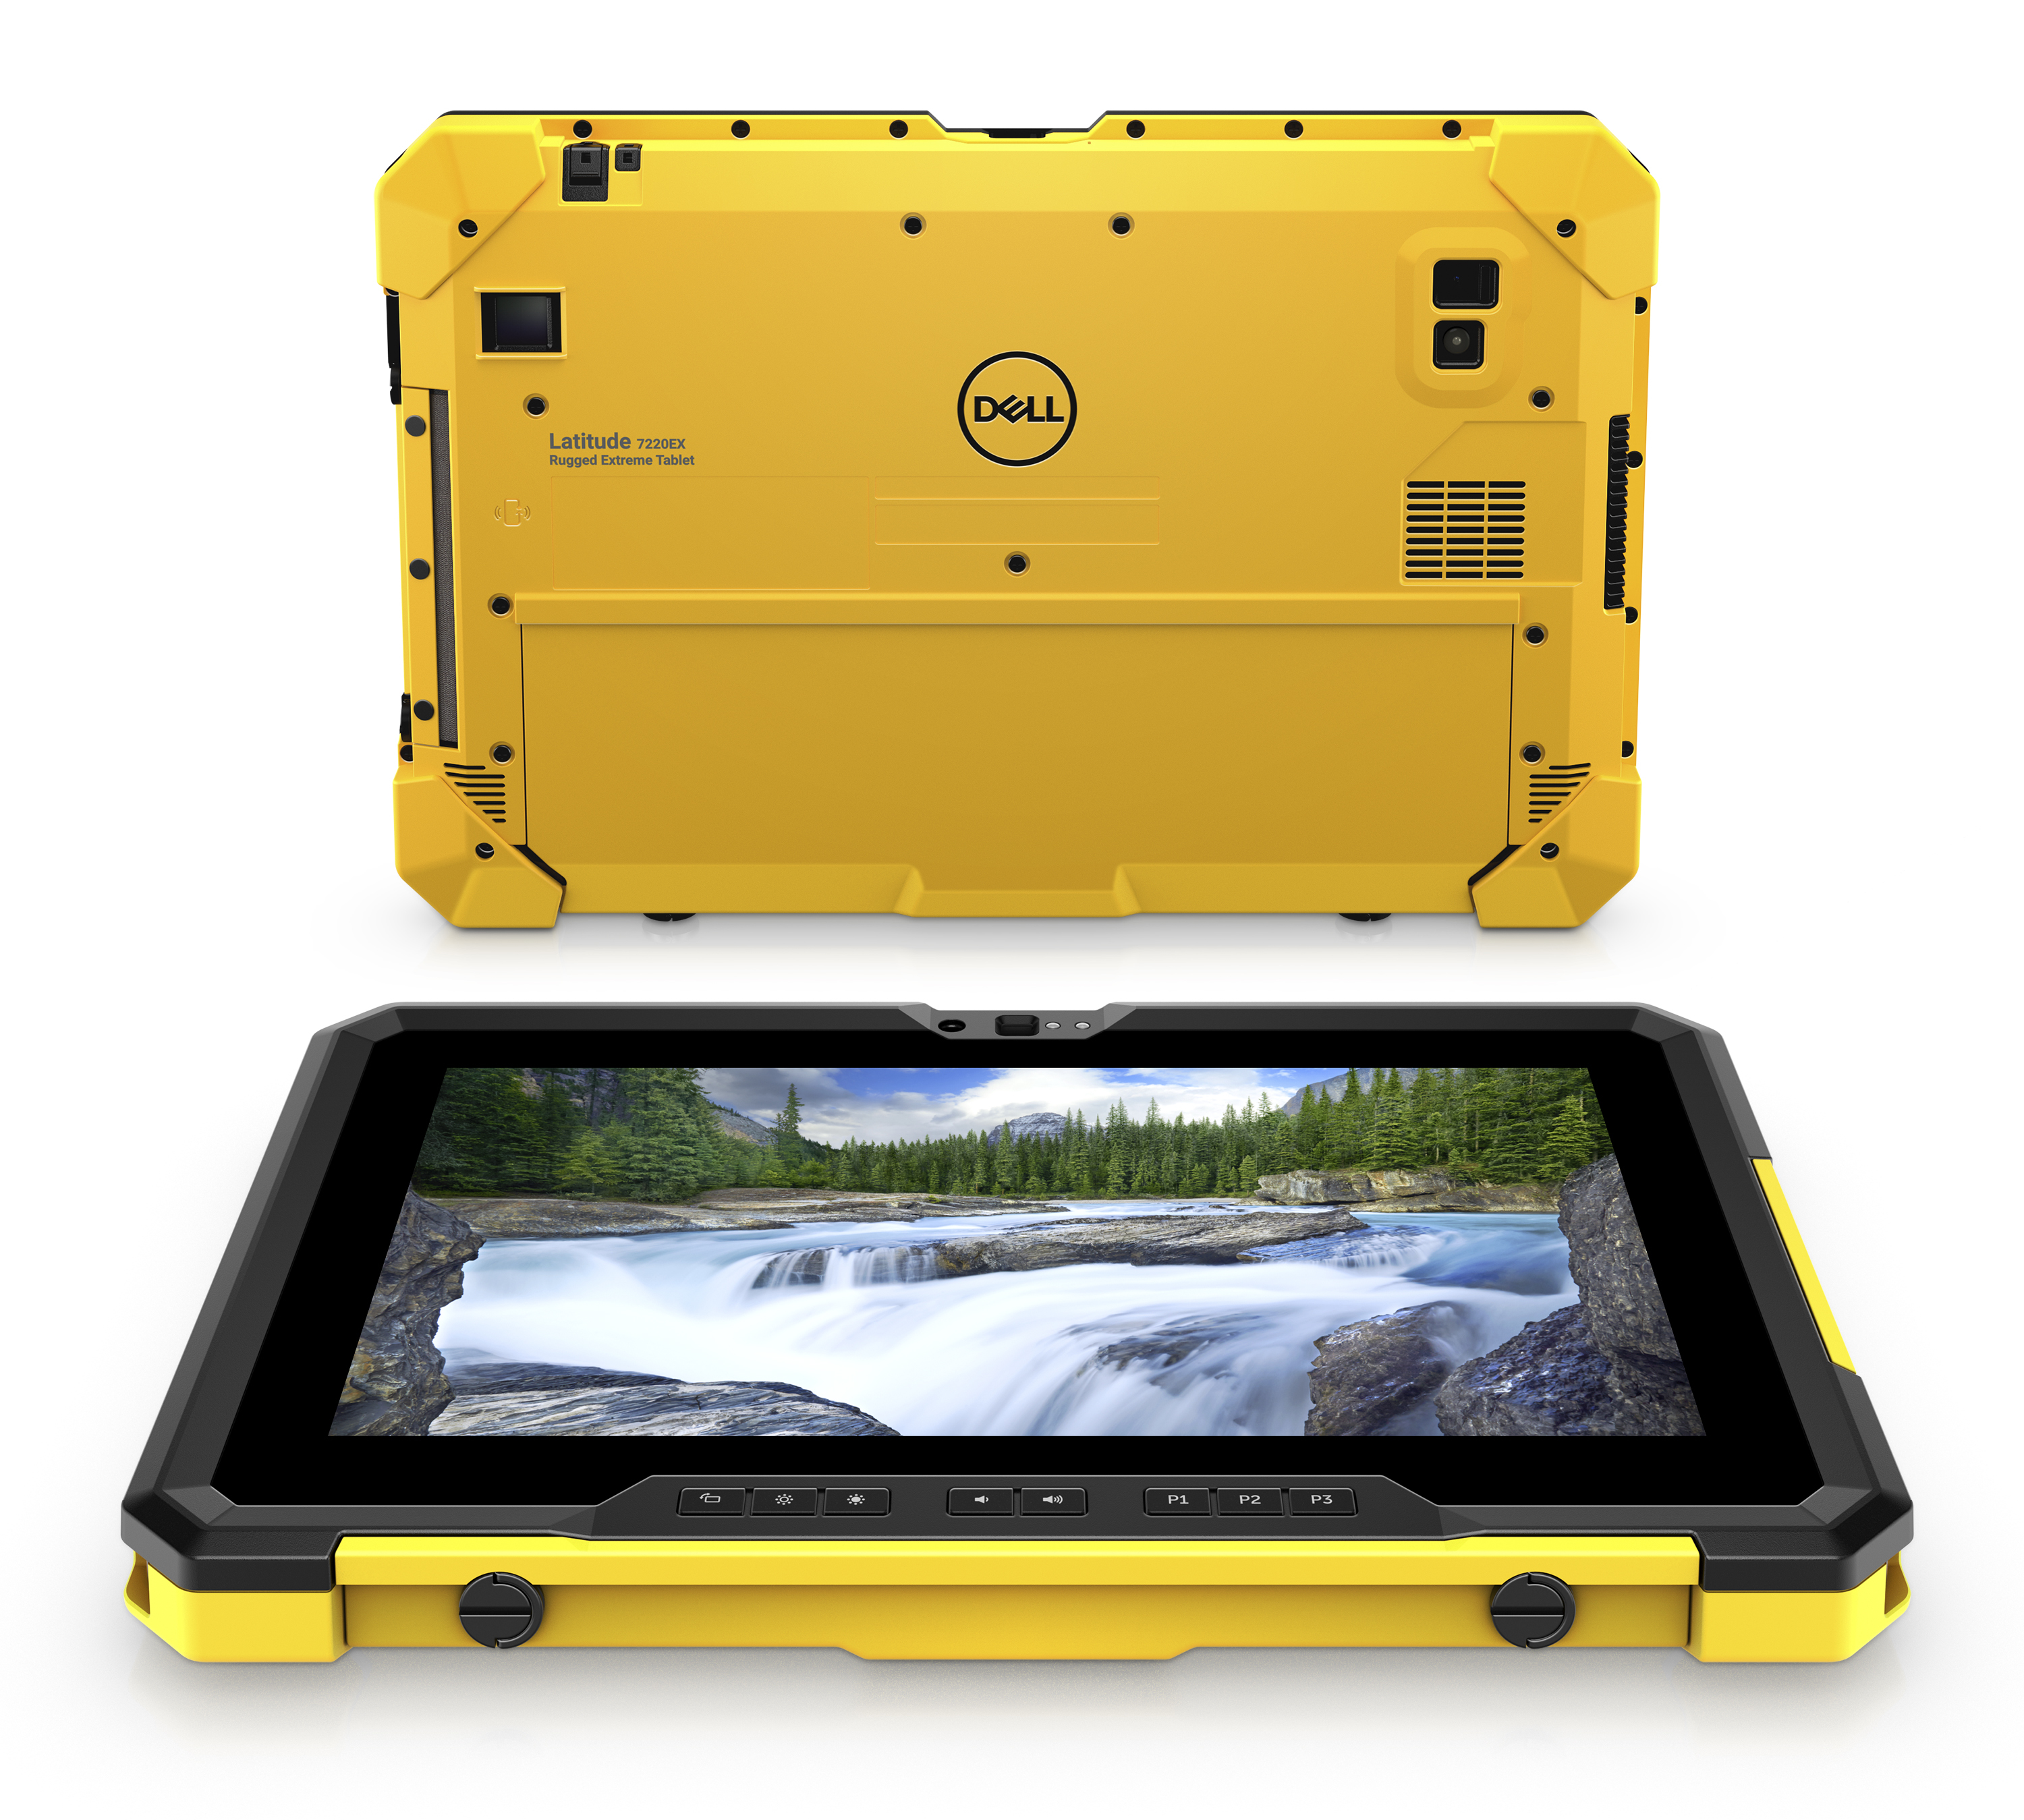 If Design Dell Latitude 7220ex Rugged Extreme Tablet